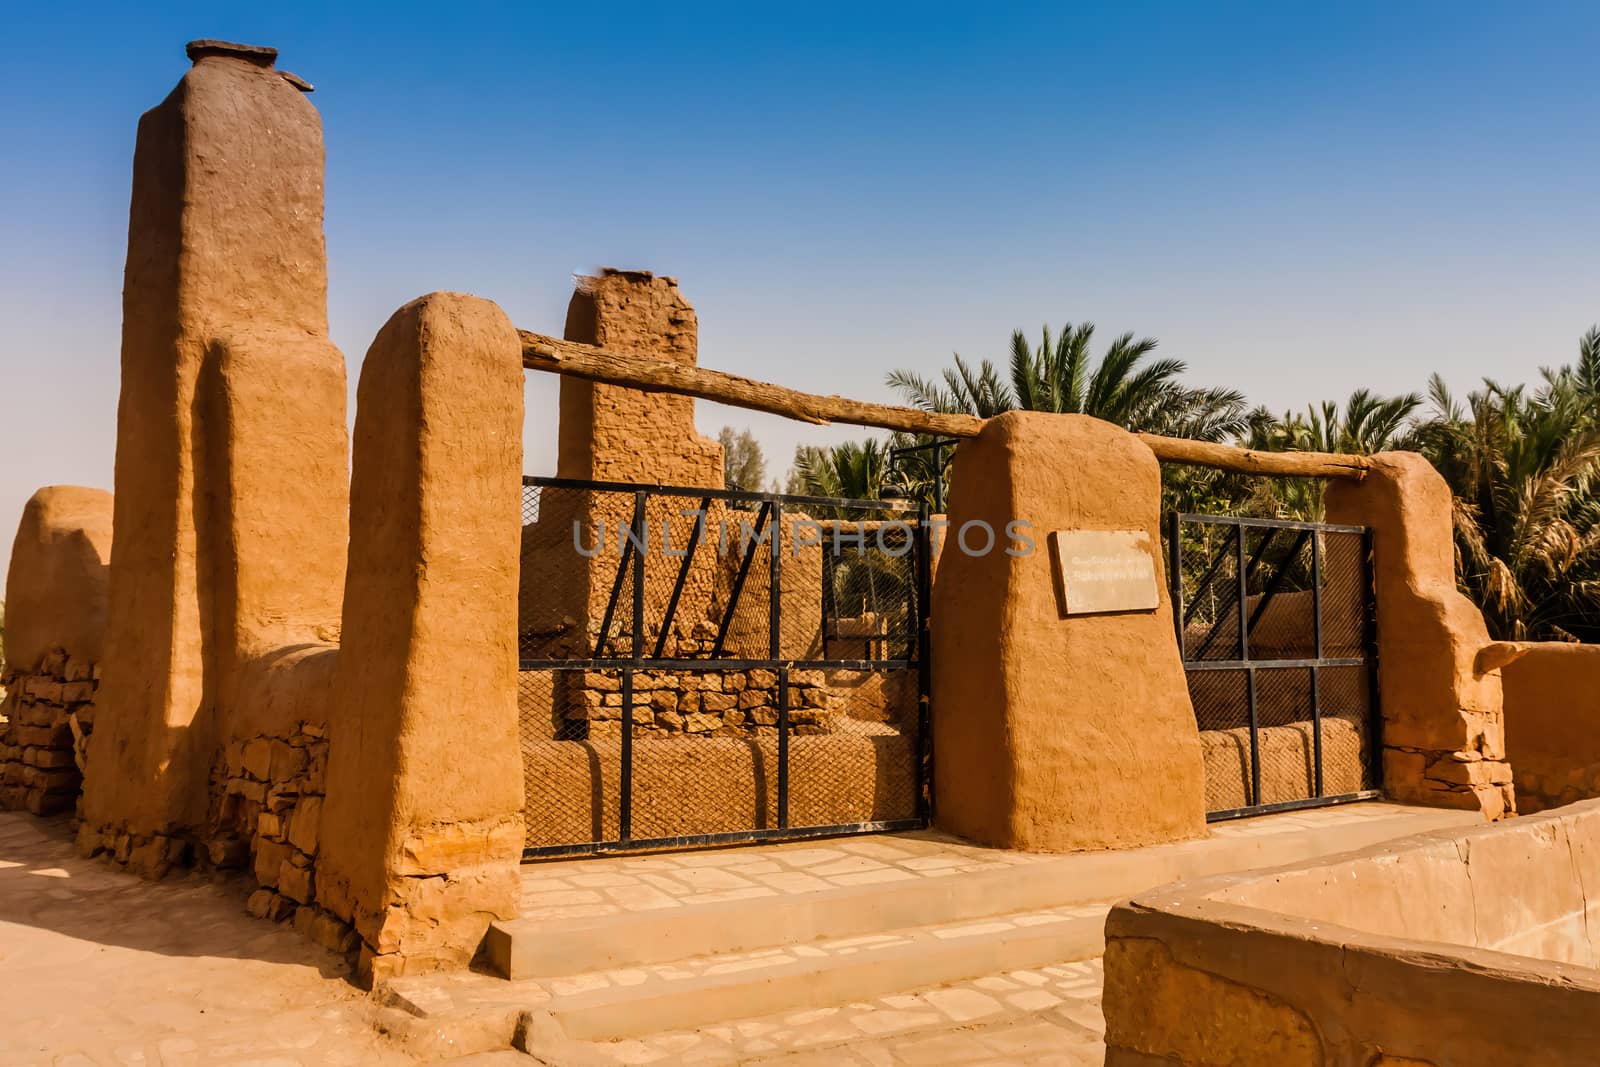 Ushaiqer Heritage Village is a popular tourist attraction some 250 km from Riyadh